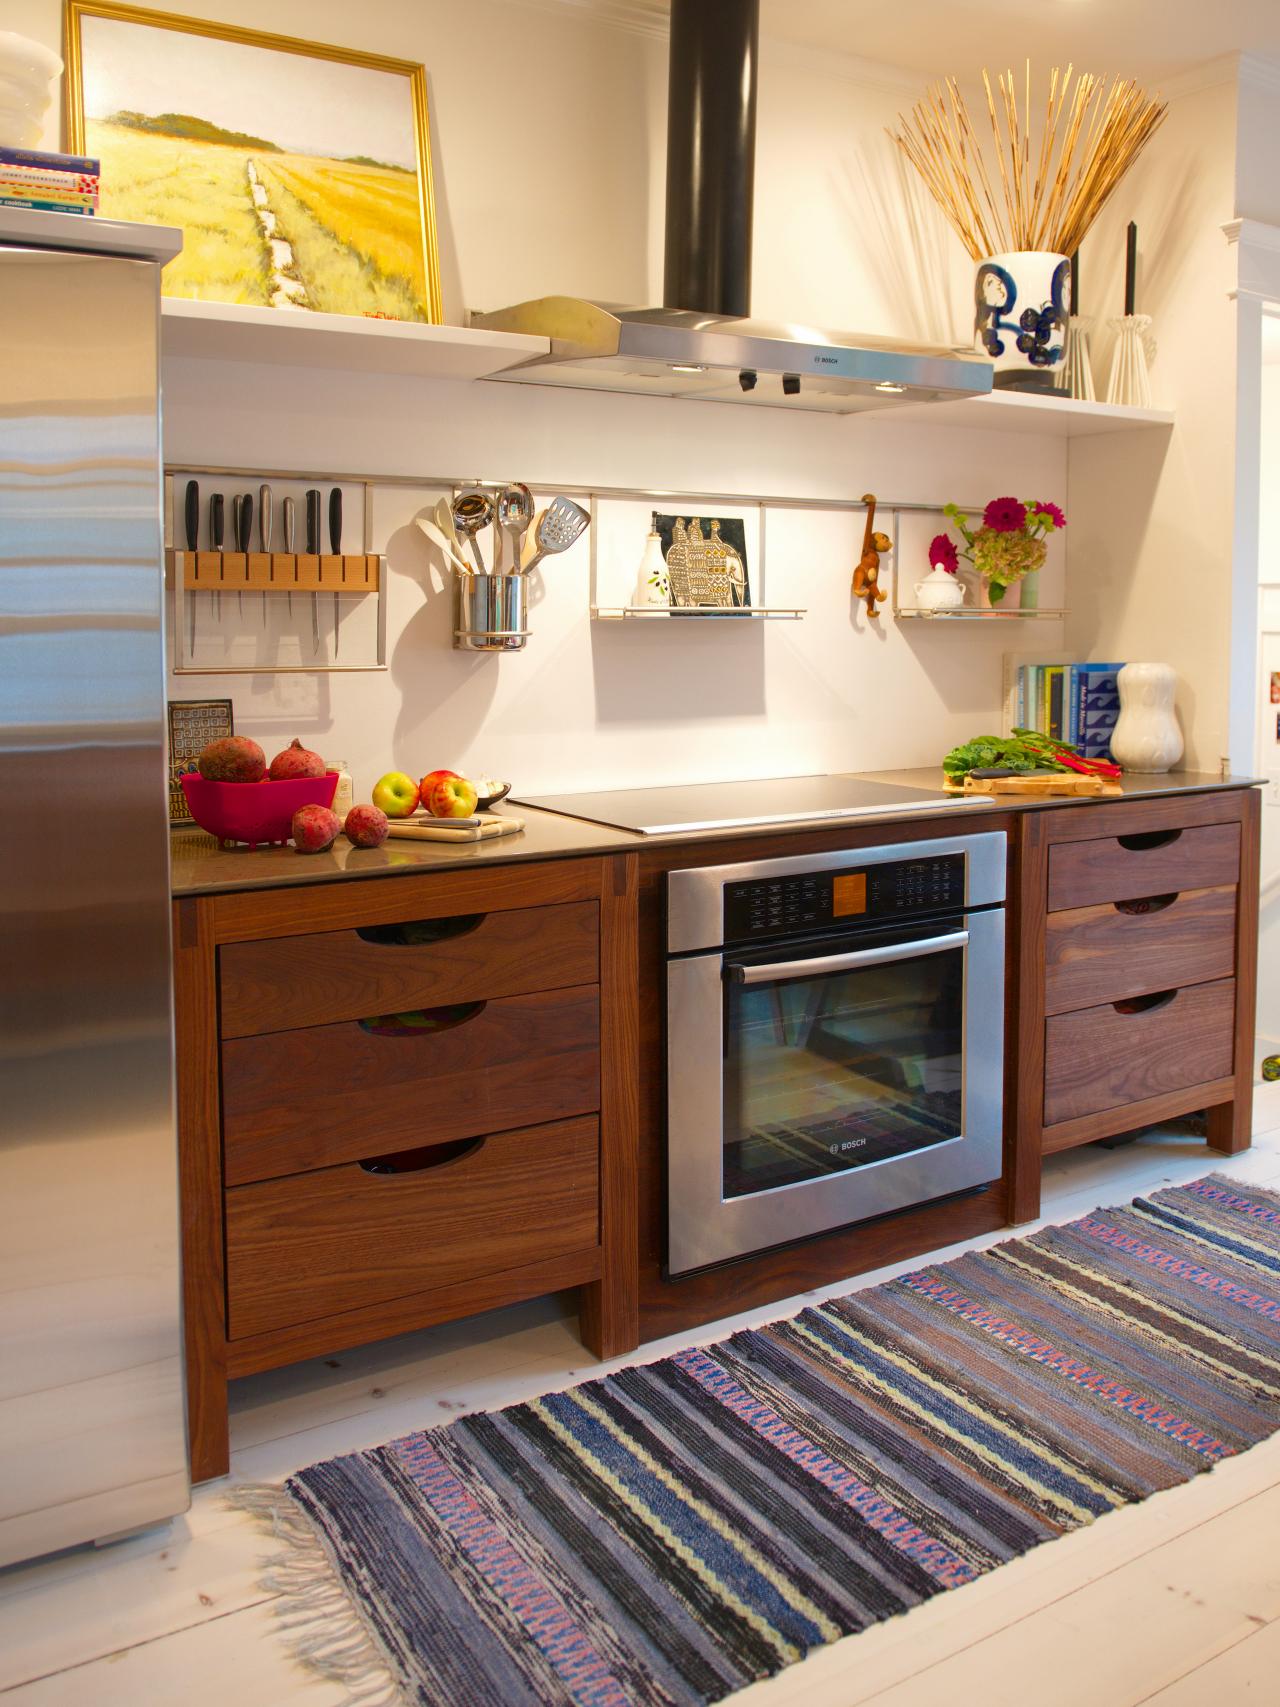 Easy Organizational Solutions for: Kitchens | DIY Network Blog: Made